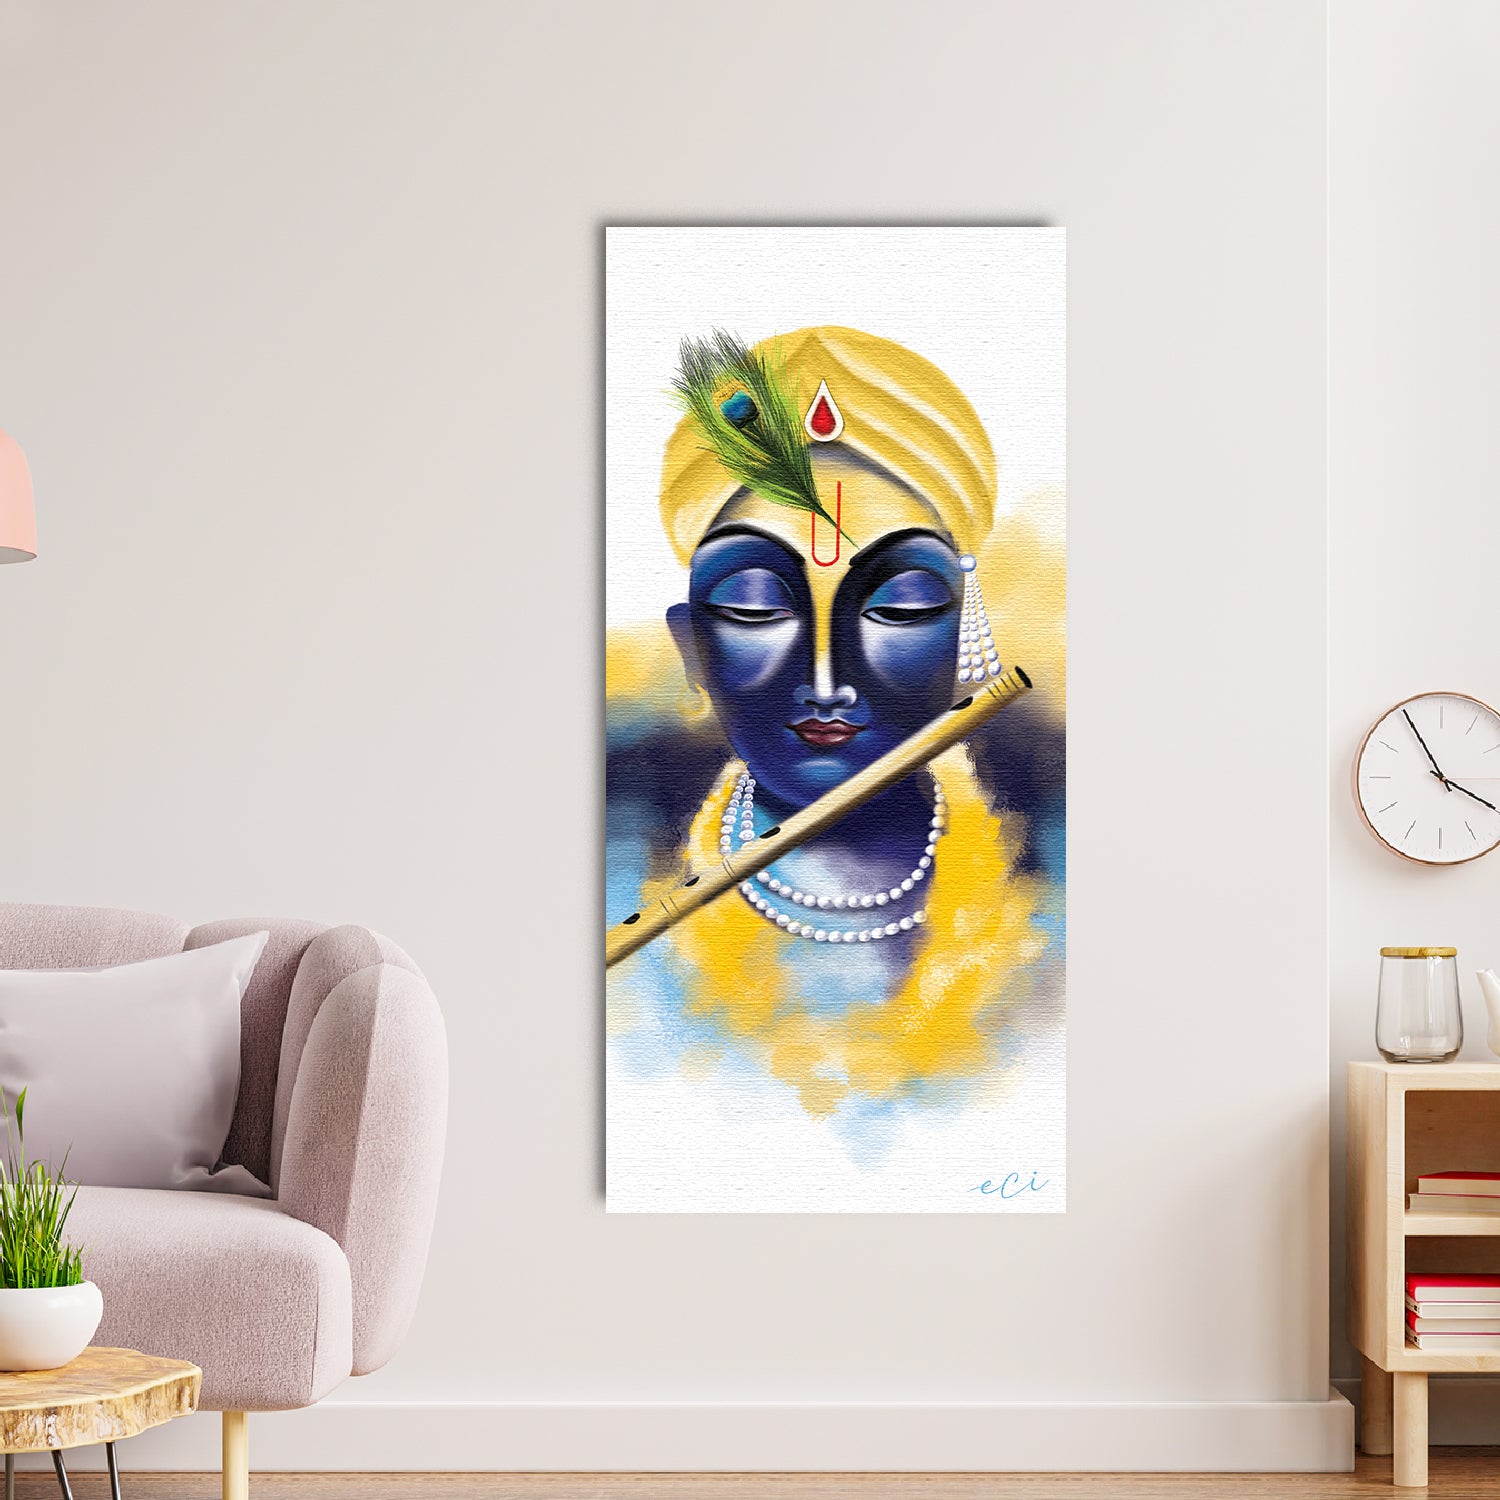 Lord Krishna Playing Flute Painting On Canvas Digital Printed Religious Wall Art